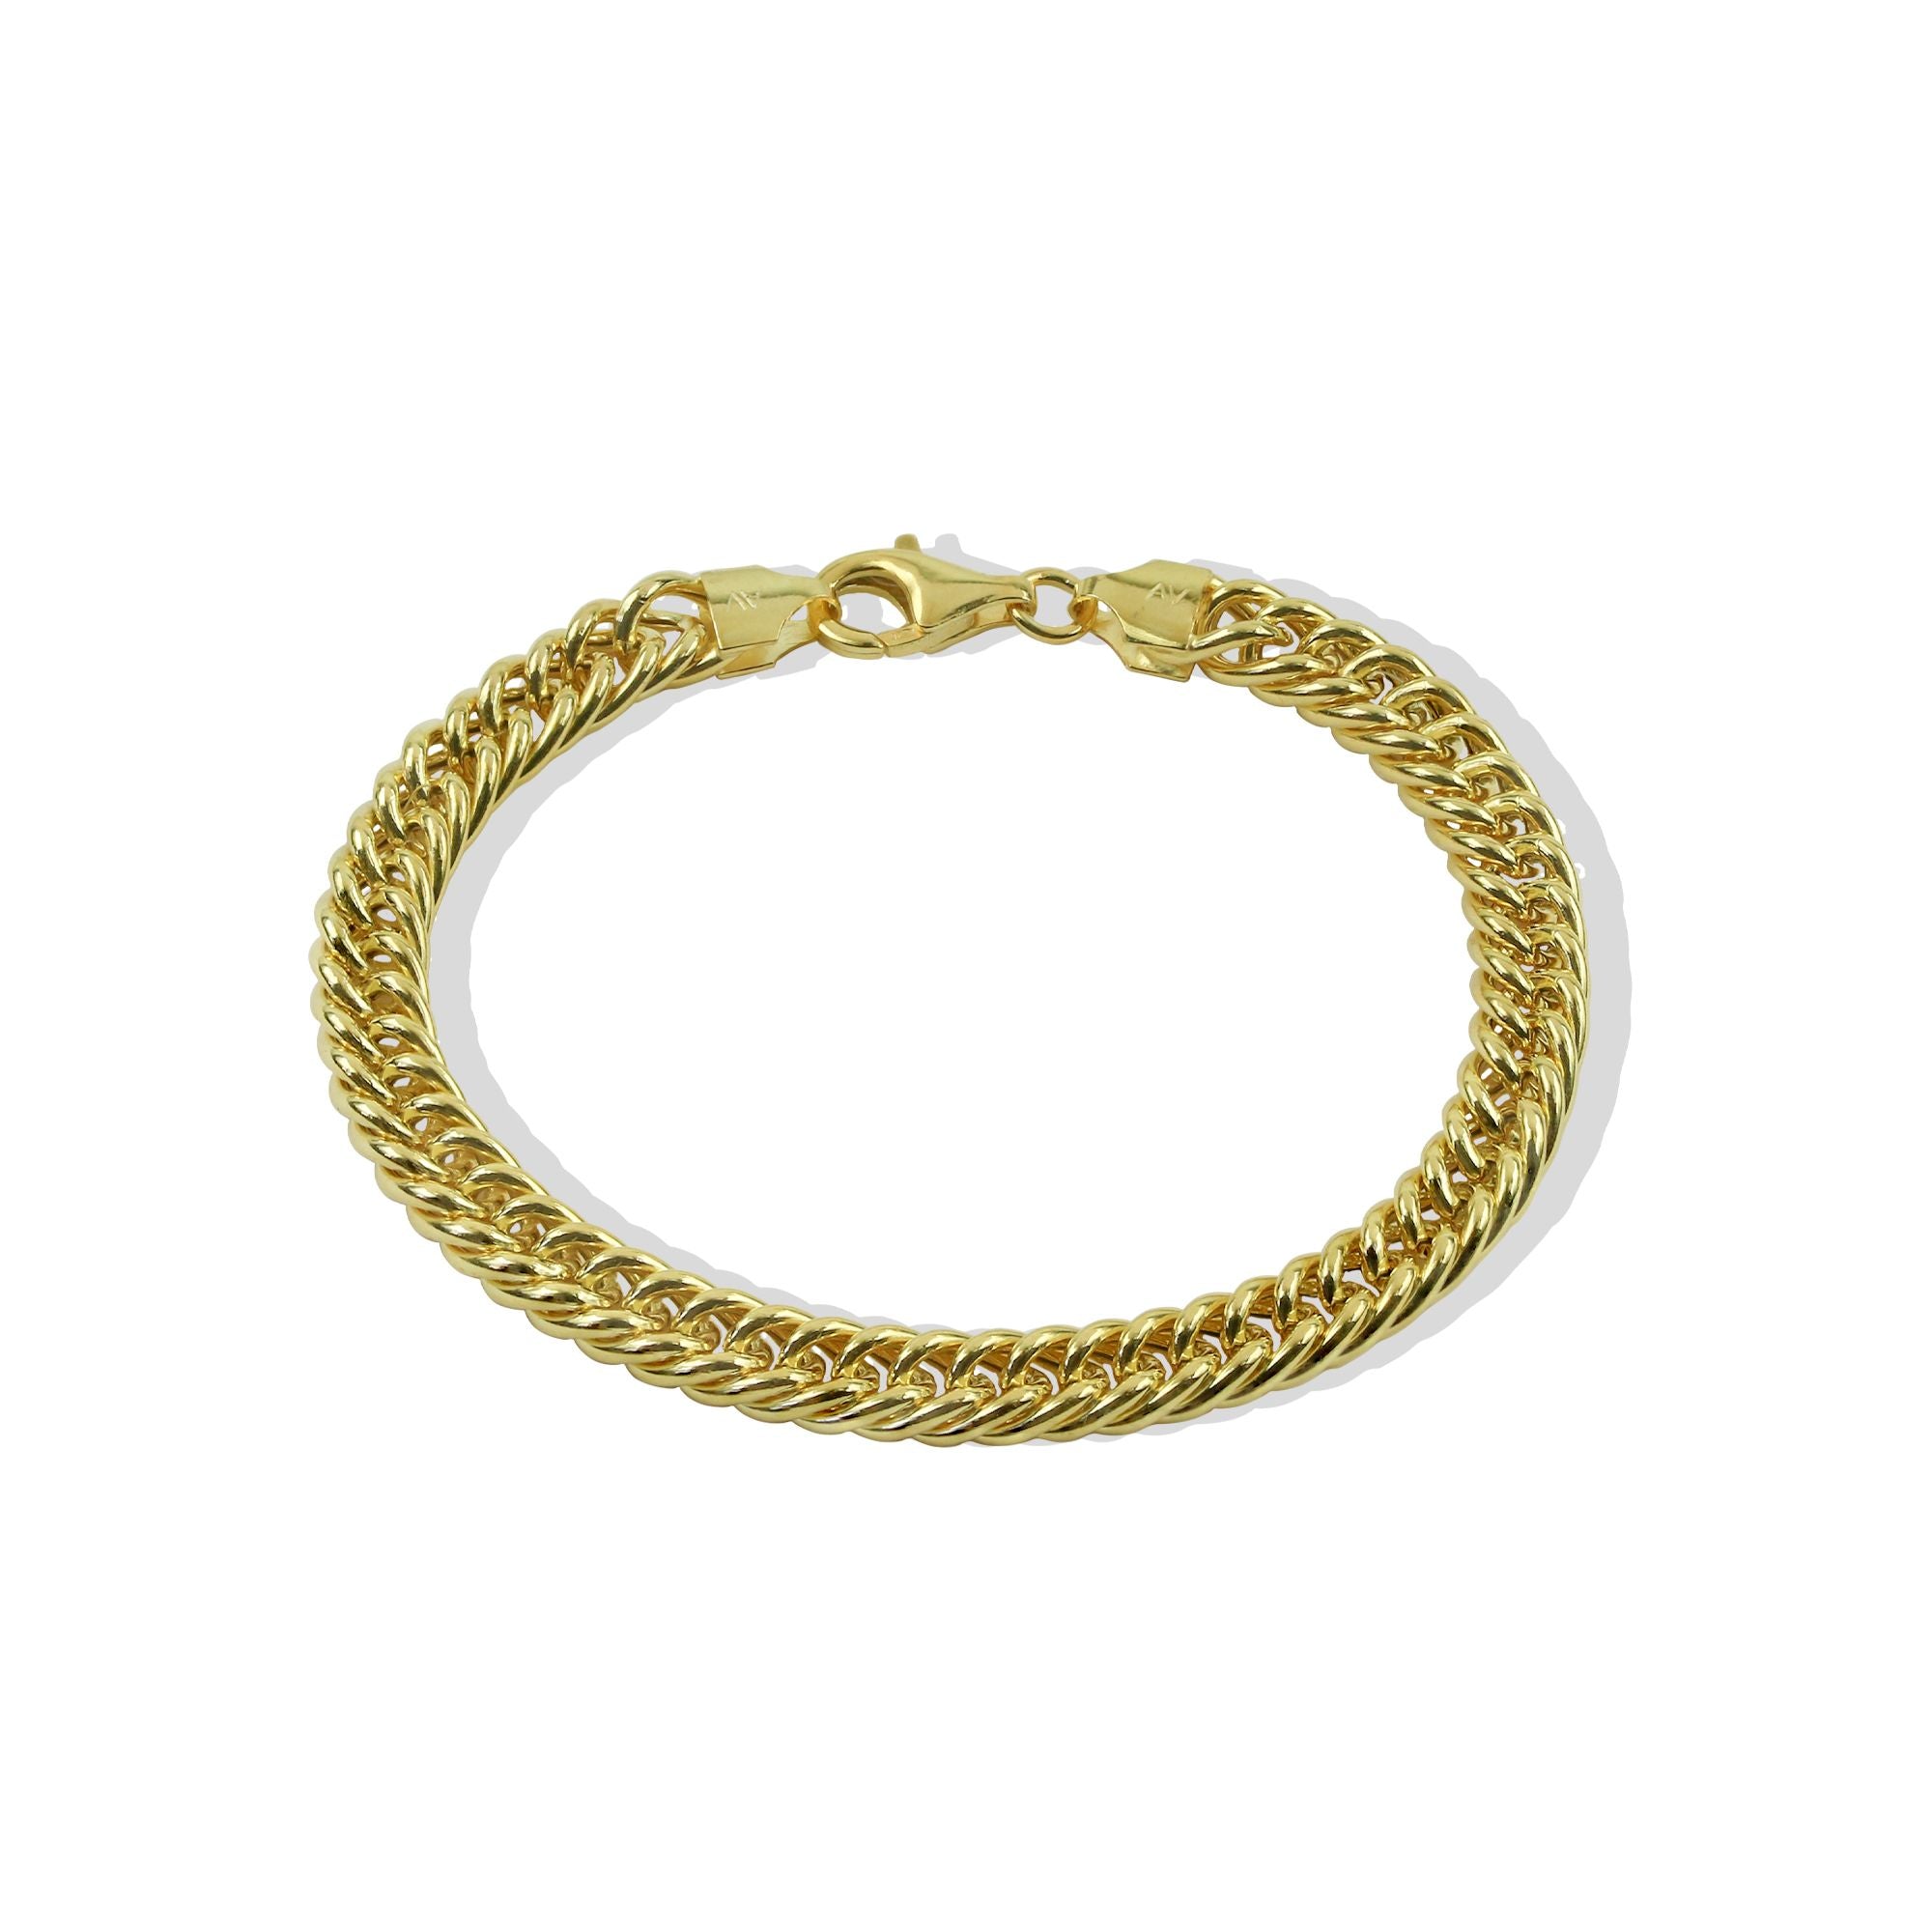 THE ARES CHAIN BRACELET